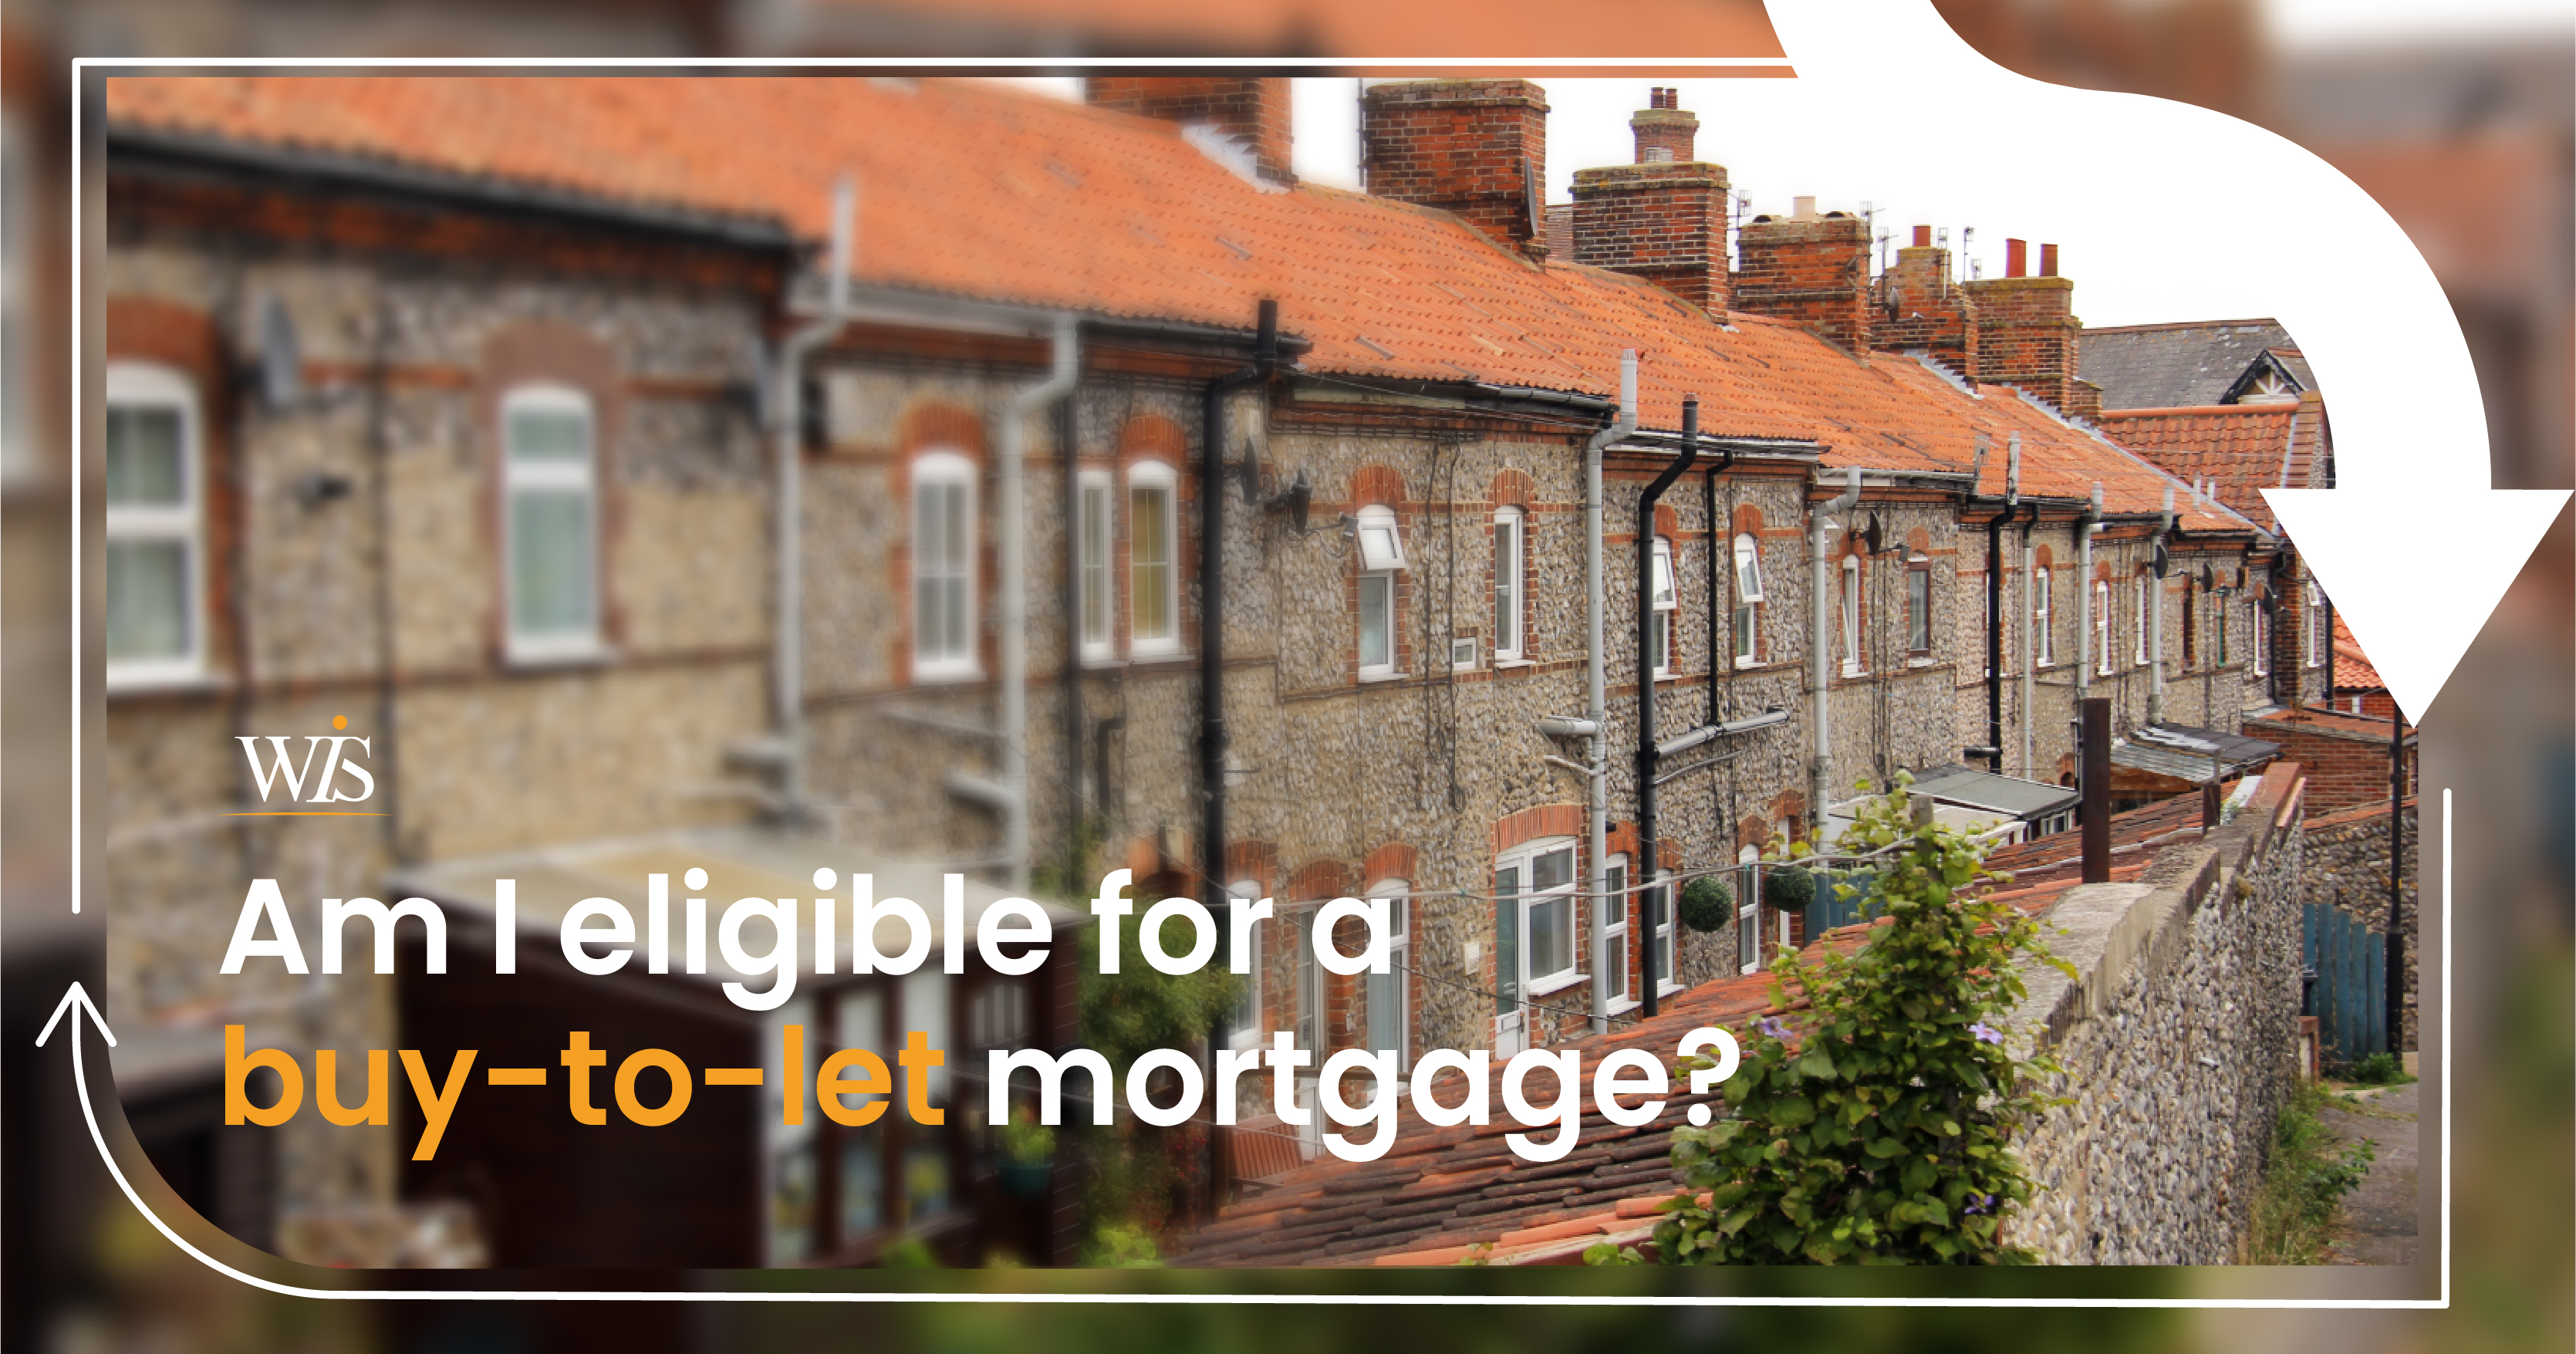 As a contractor in the UK am I eligible for a buy to let mortgage? image